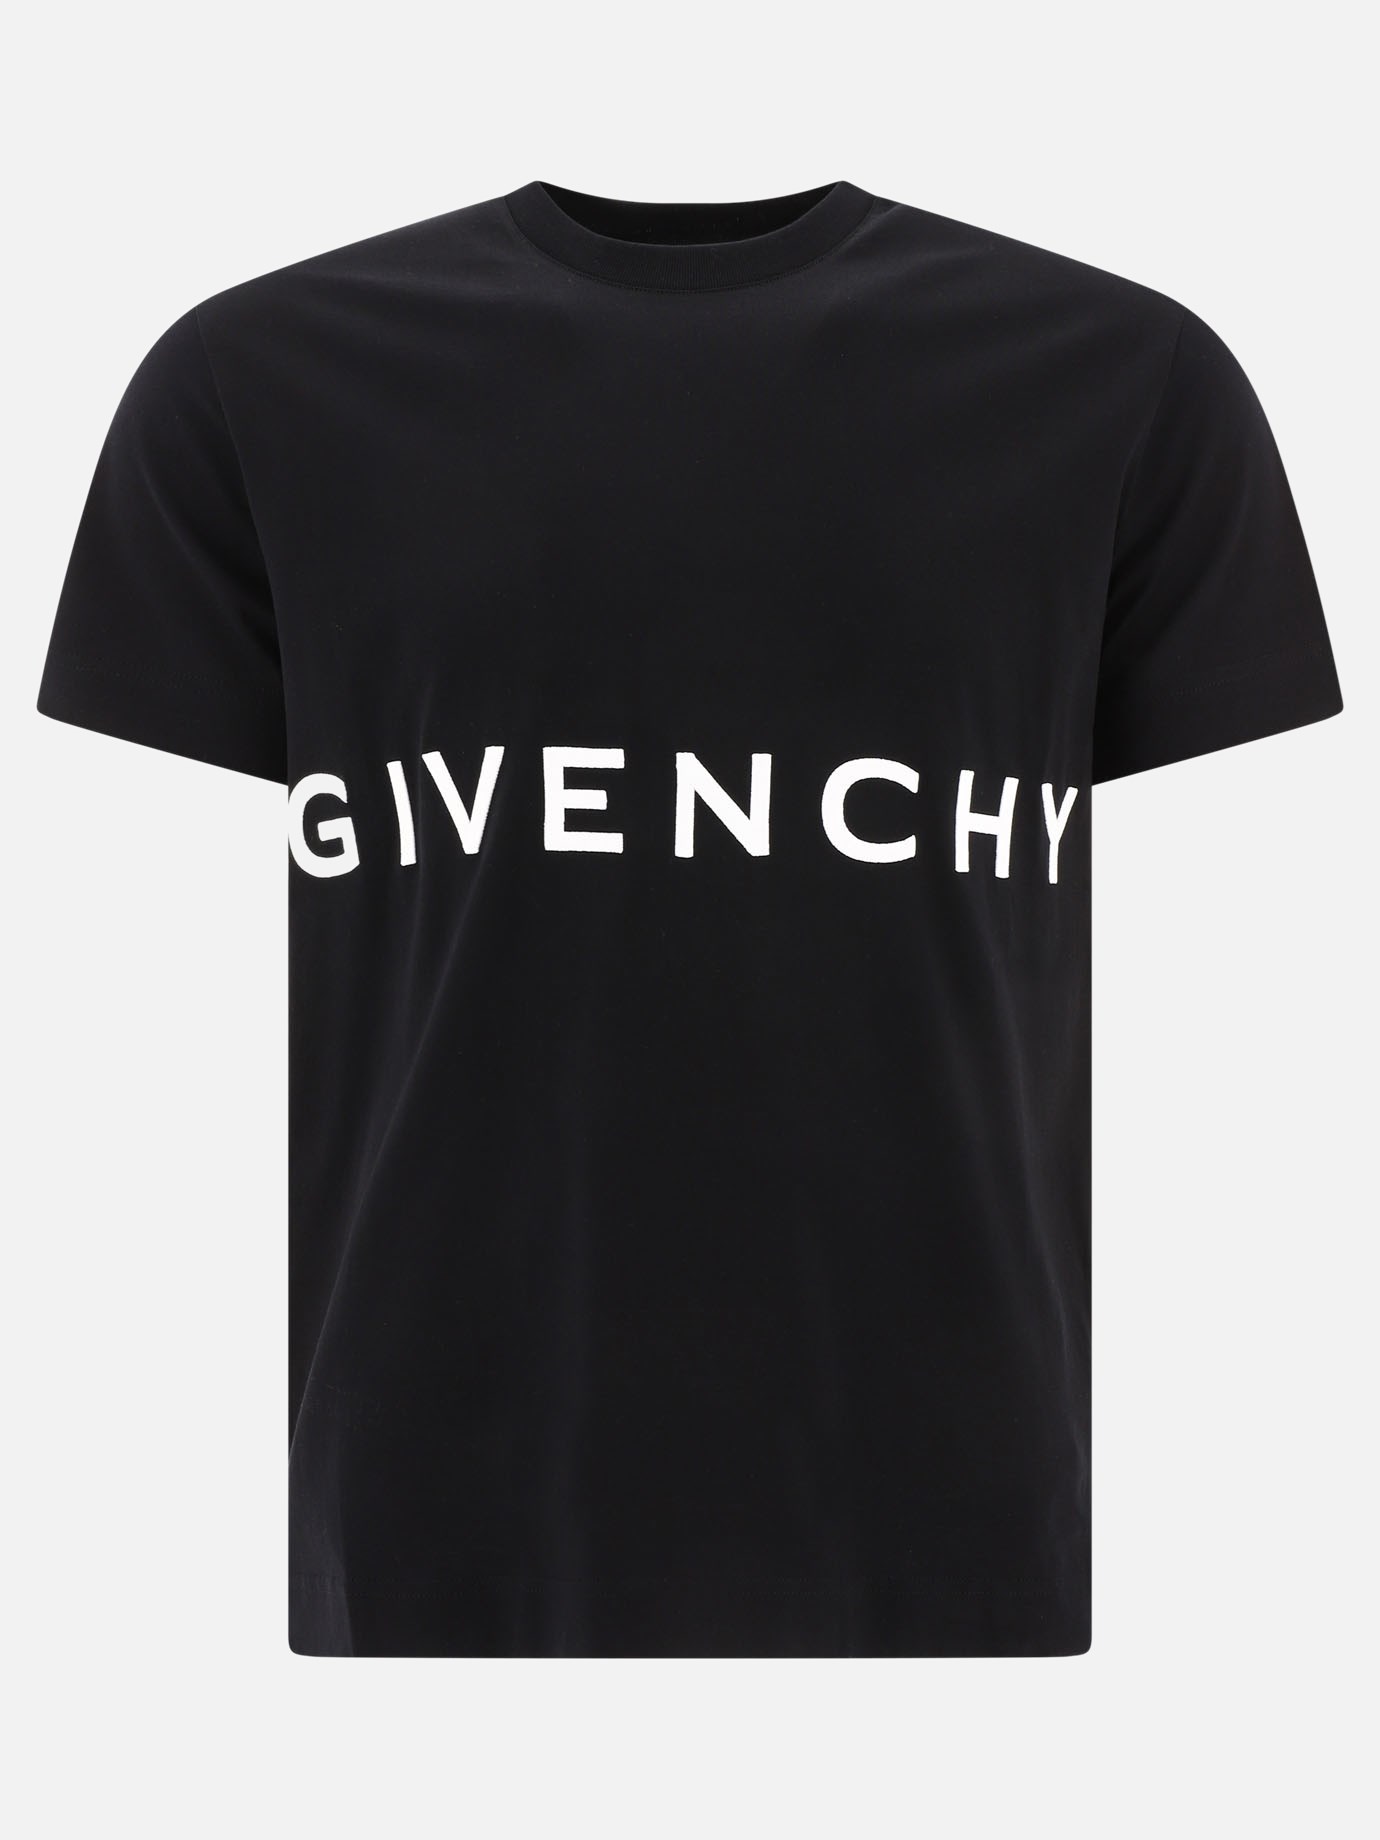  Givenchy 4G  t-shirtby Givenchy - 2